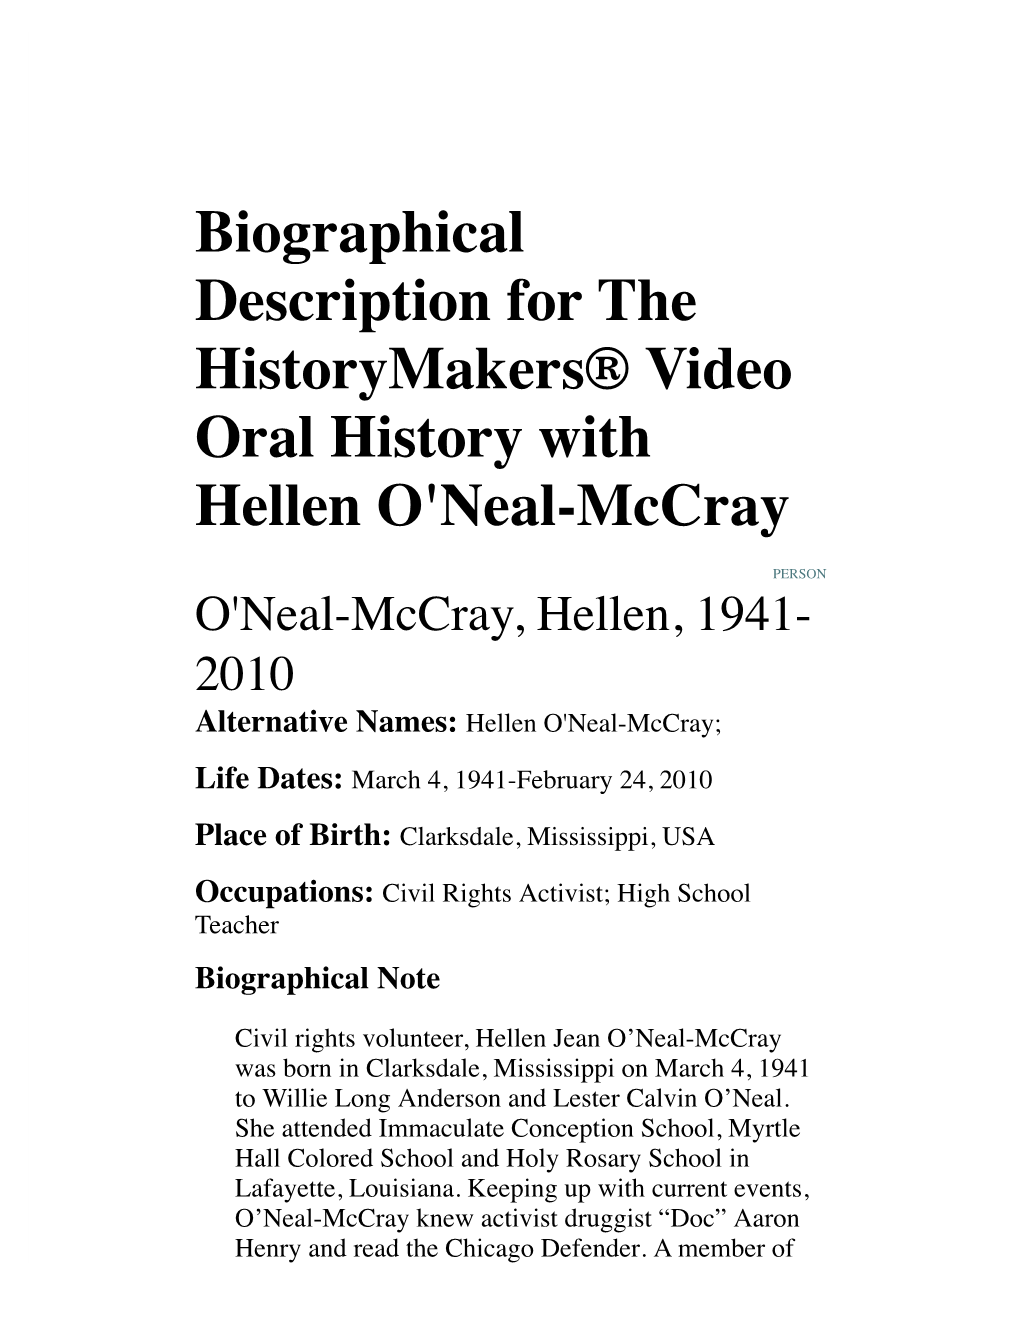 Biographical Description for the Historymakers® Video Oral History with Hellen O'neal-Mccray